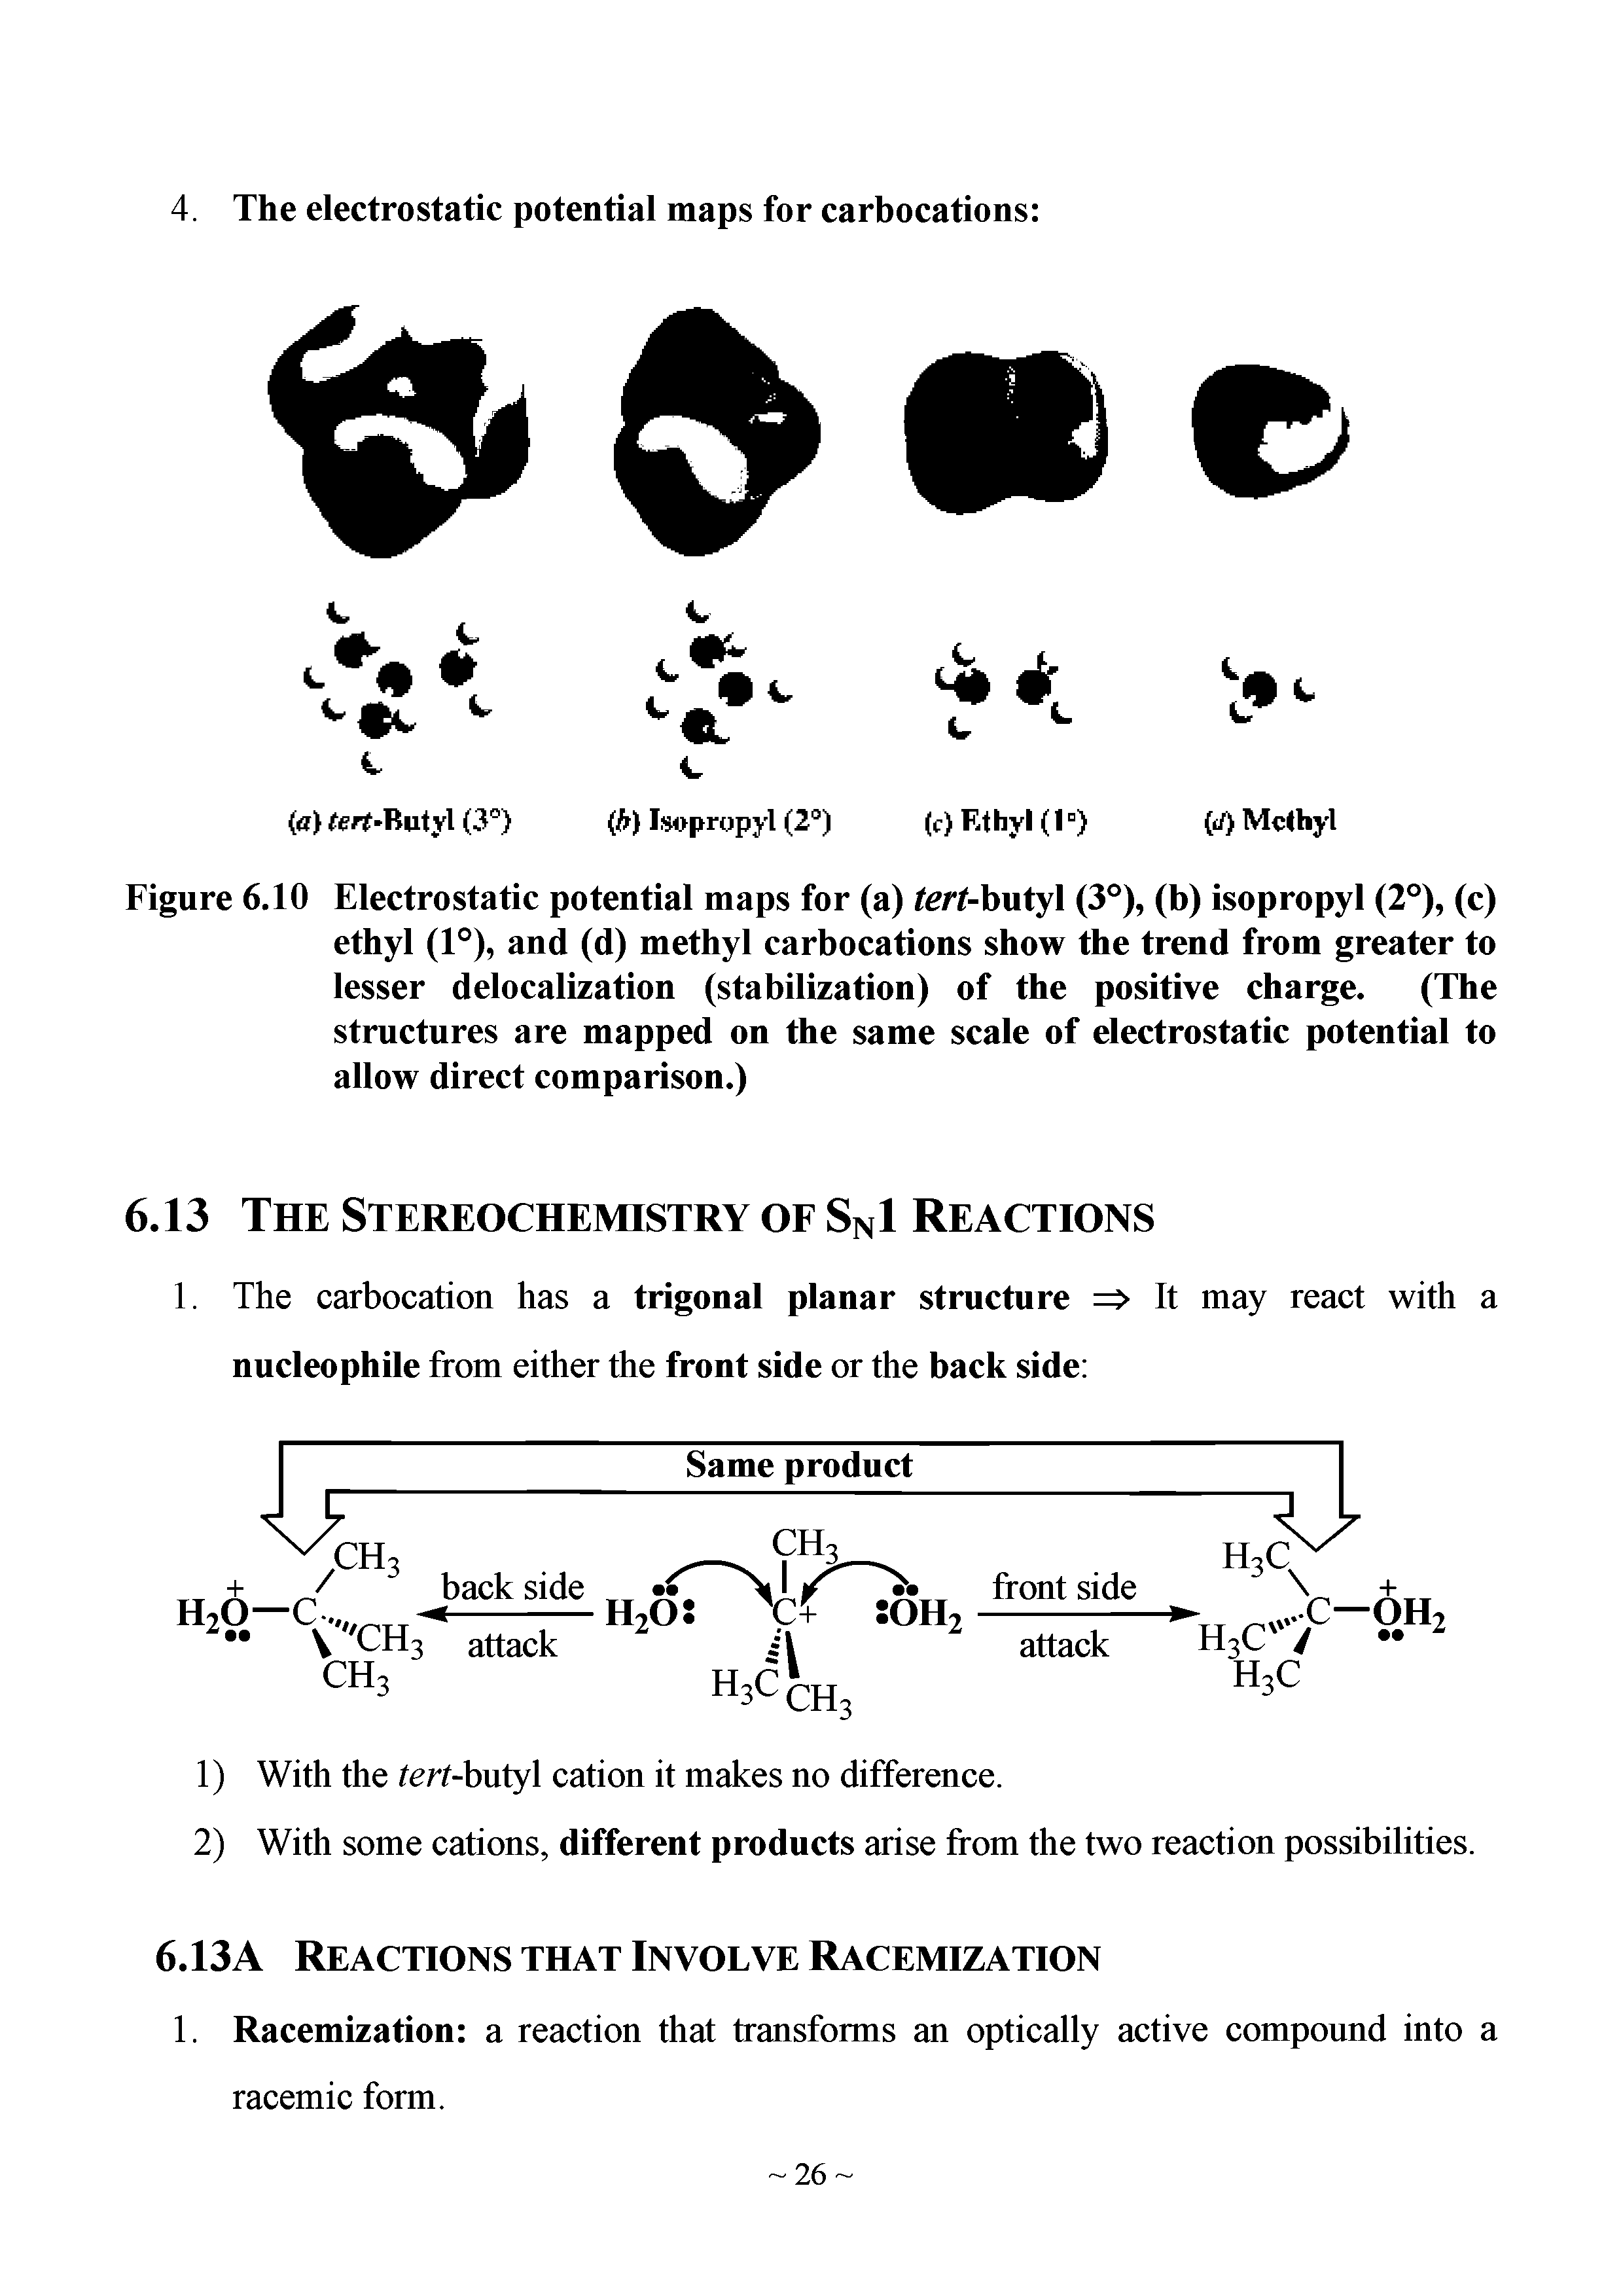 Figure 6.10 Electrostatic potential maps for (a) tert-butyl (3°), (b) isopropyl (2°), (c) ethyl (1°), and (d) methyl carbocations show the trend from greater to lesser delocalization (stabilization) of the positive charge. (The structures are mapped on the same scale of electrostatic potential to allow direct comparison.)...